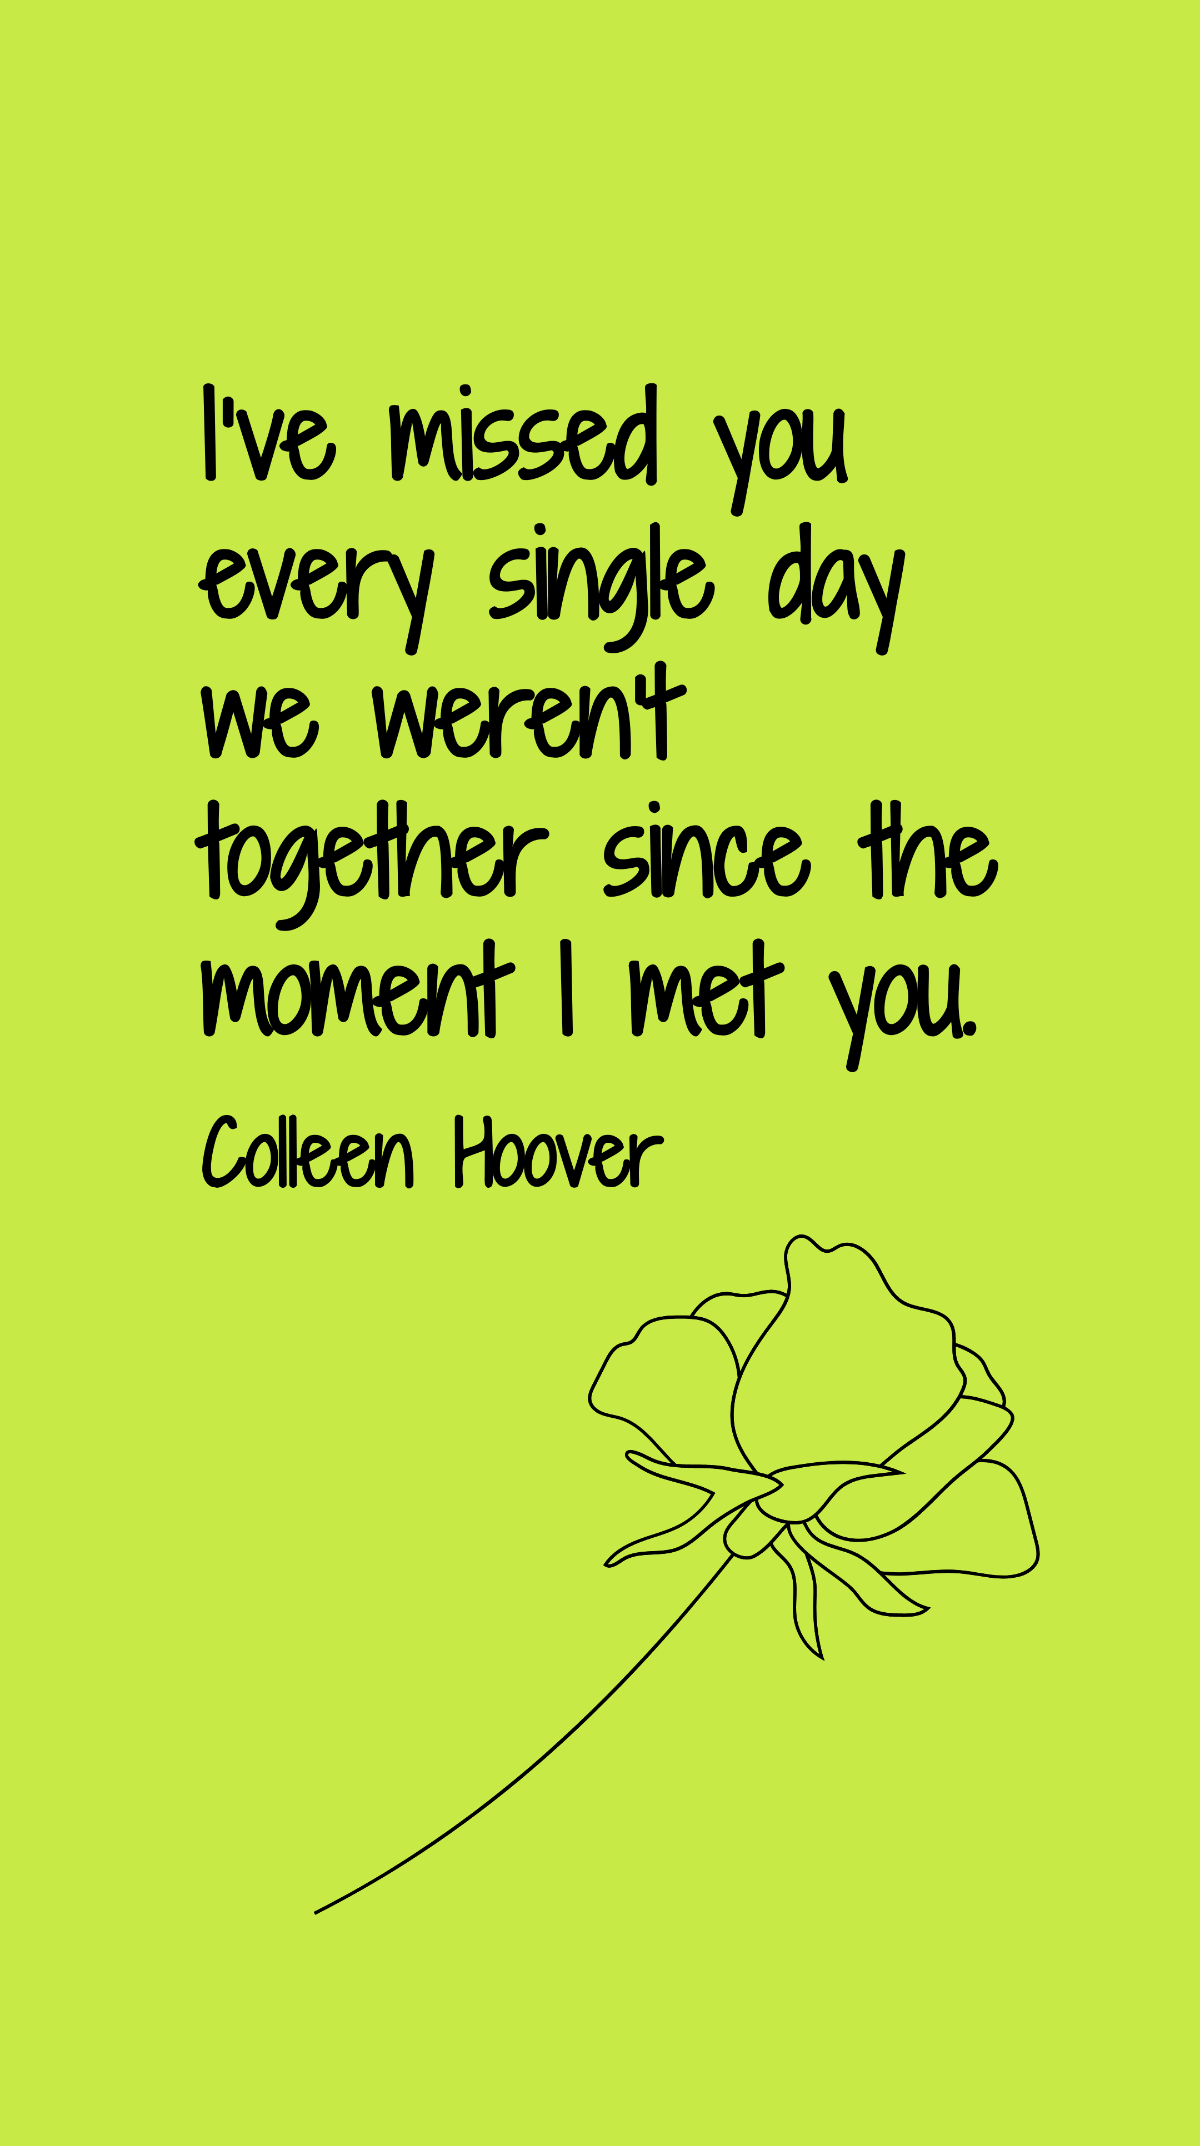 Colleen Hoover - I’ve missed you every single day we weren’t together since the moment I met you.